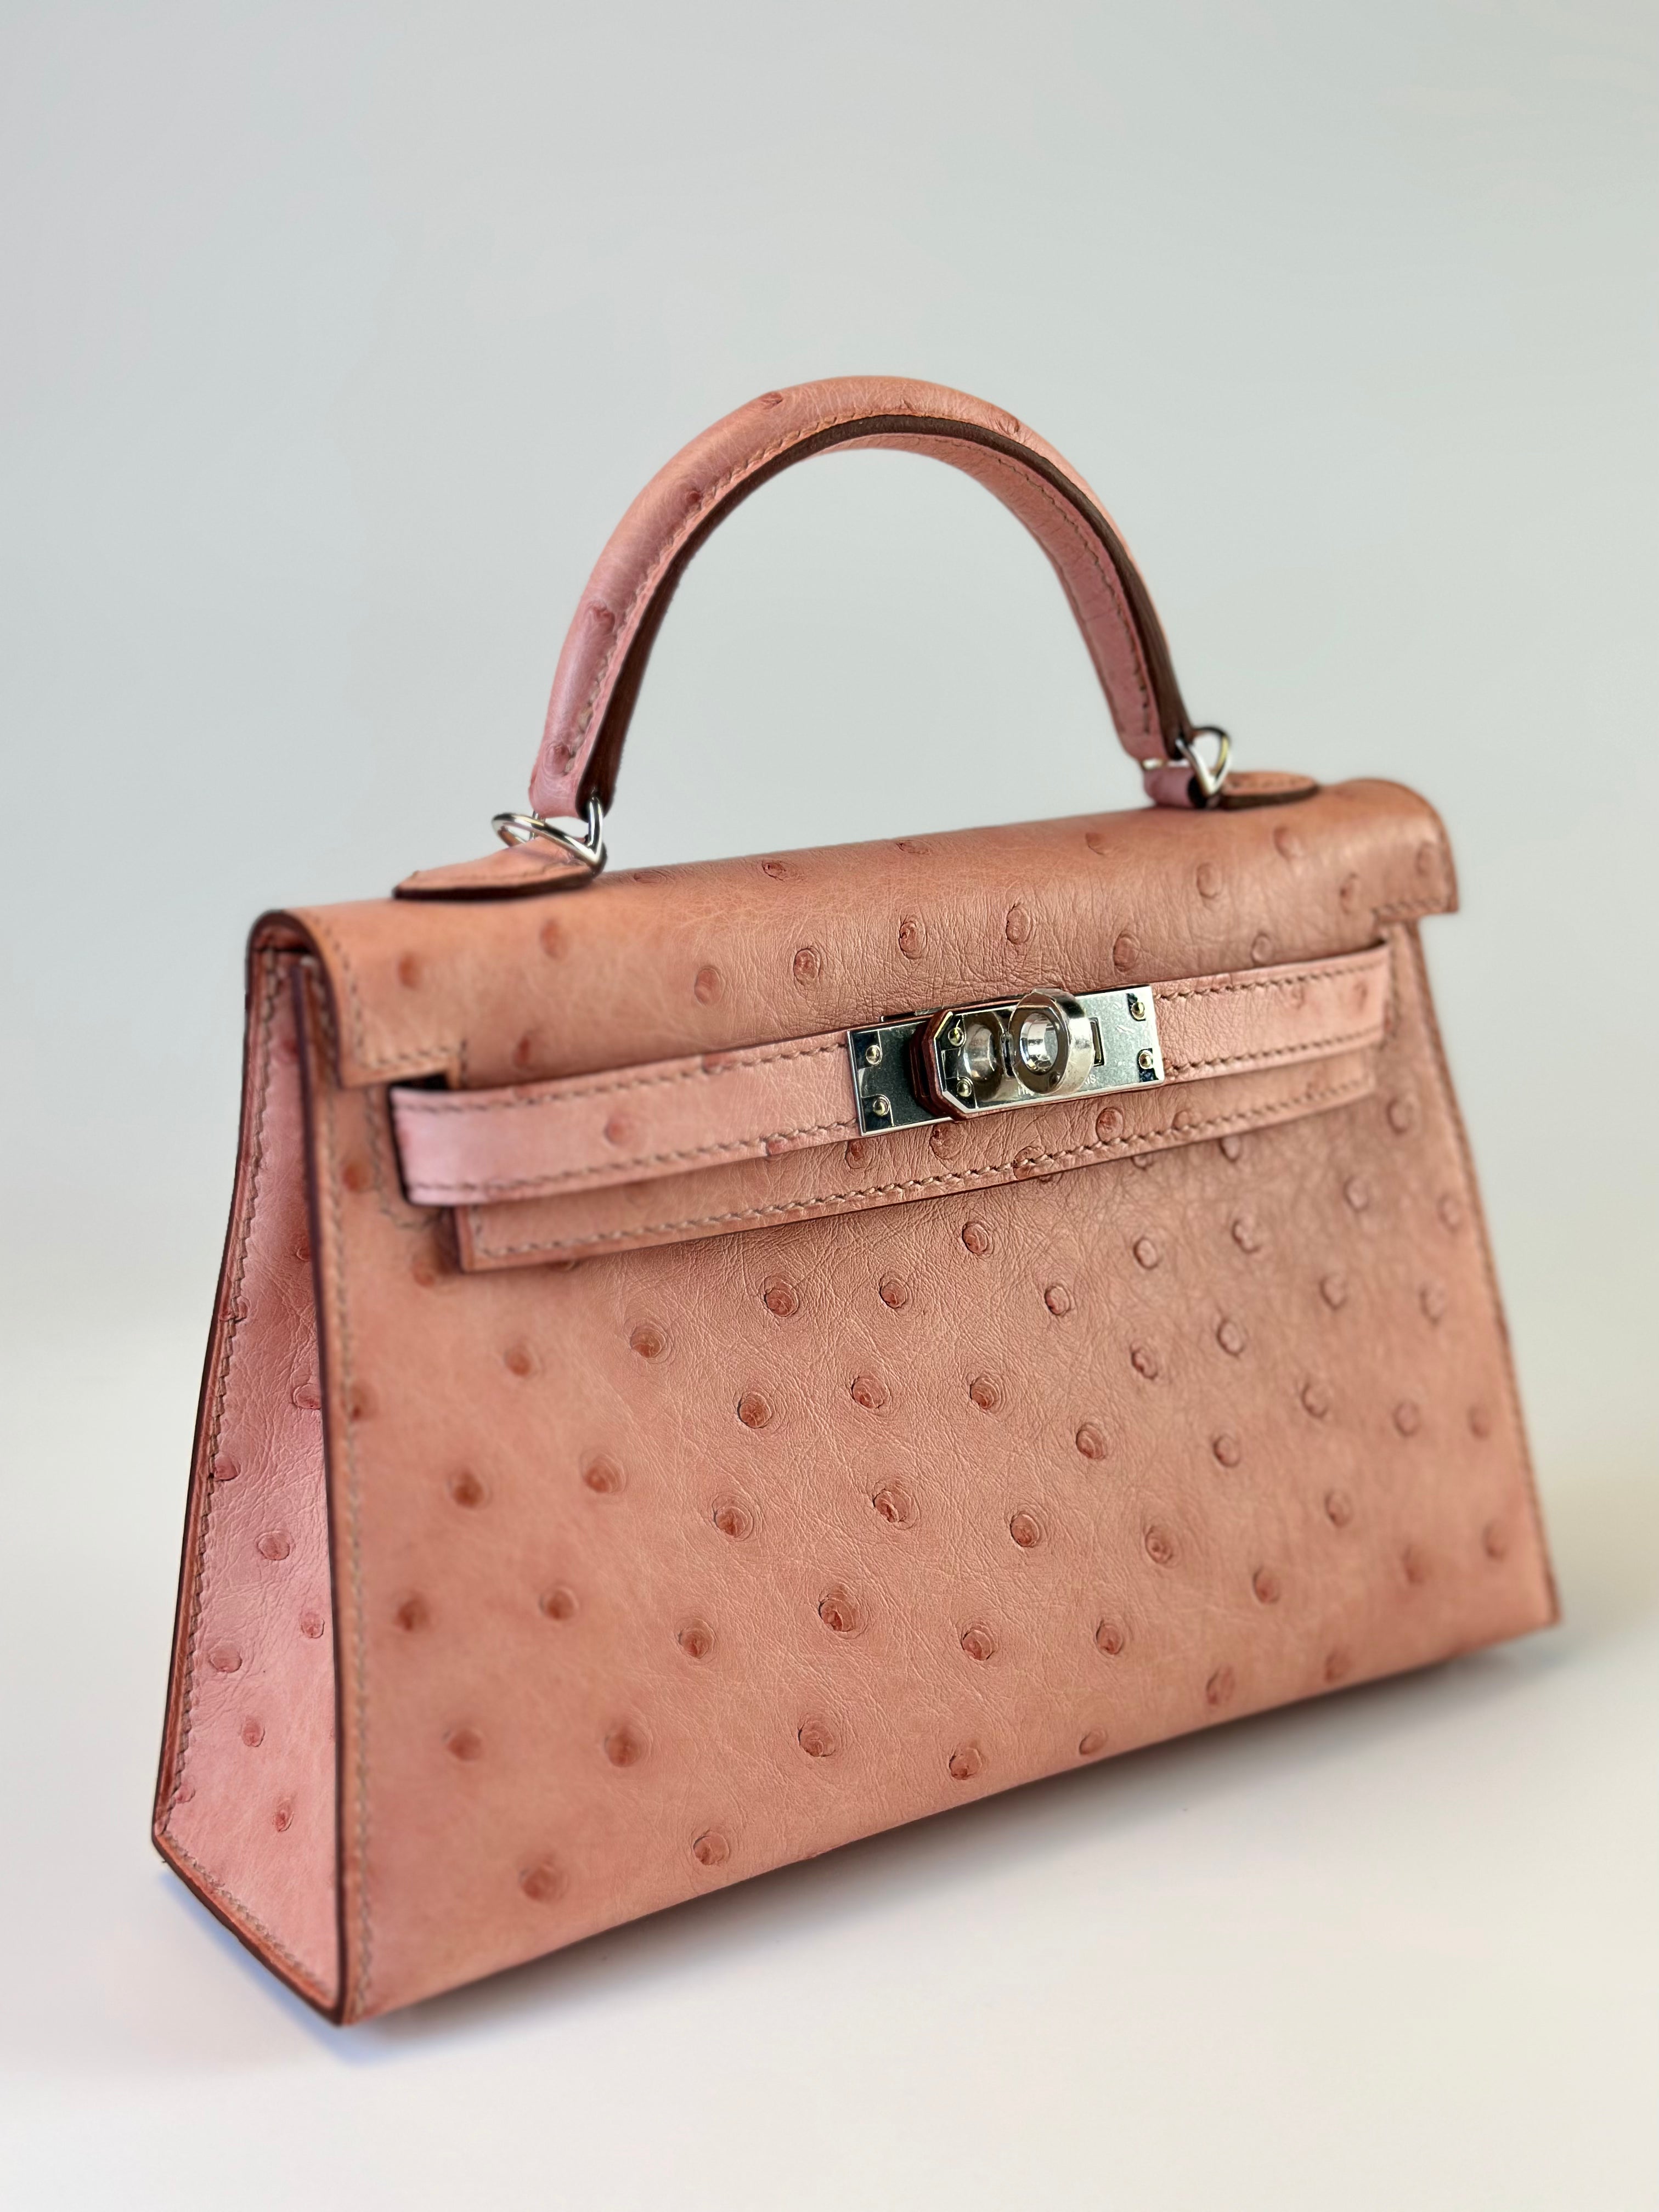 Hermes Kelly Pochette Terre Cuite Ostrich Leather